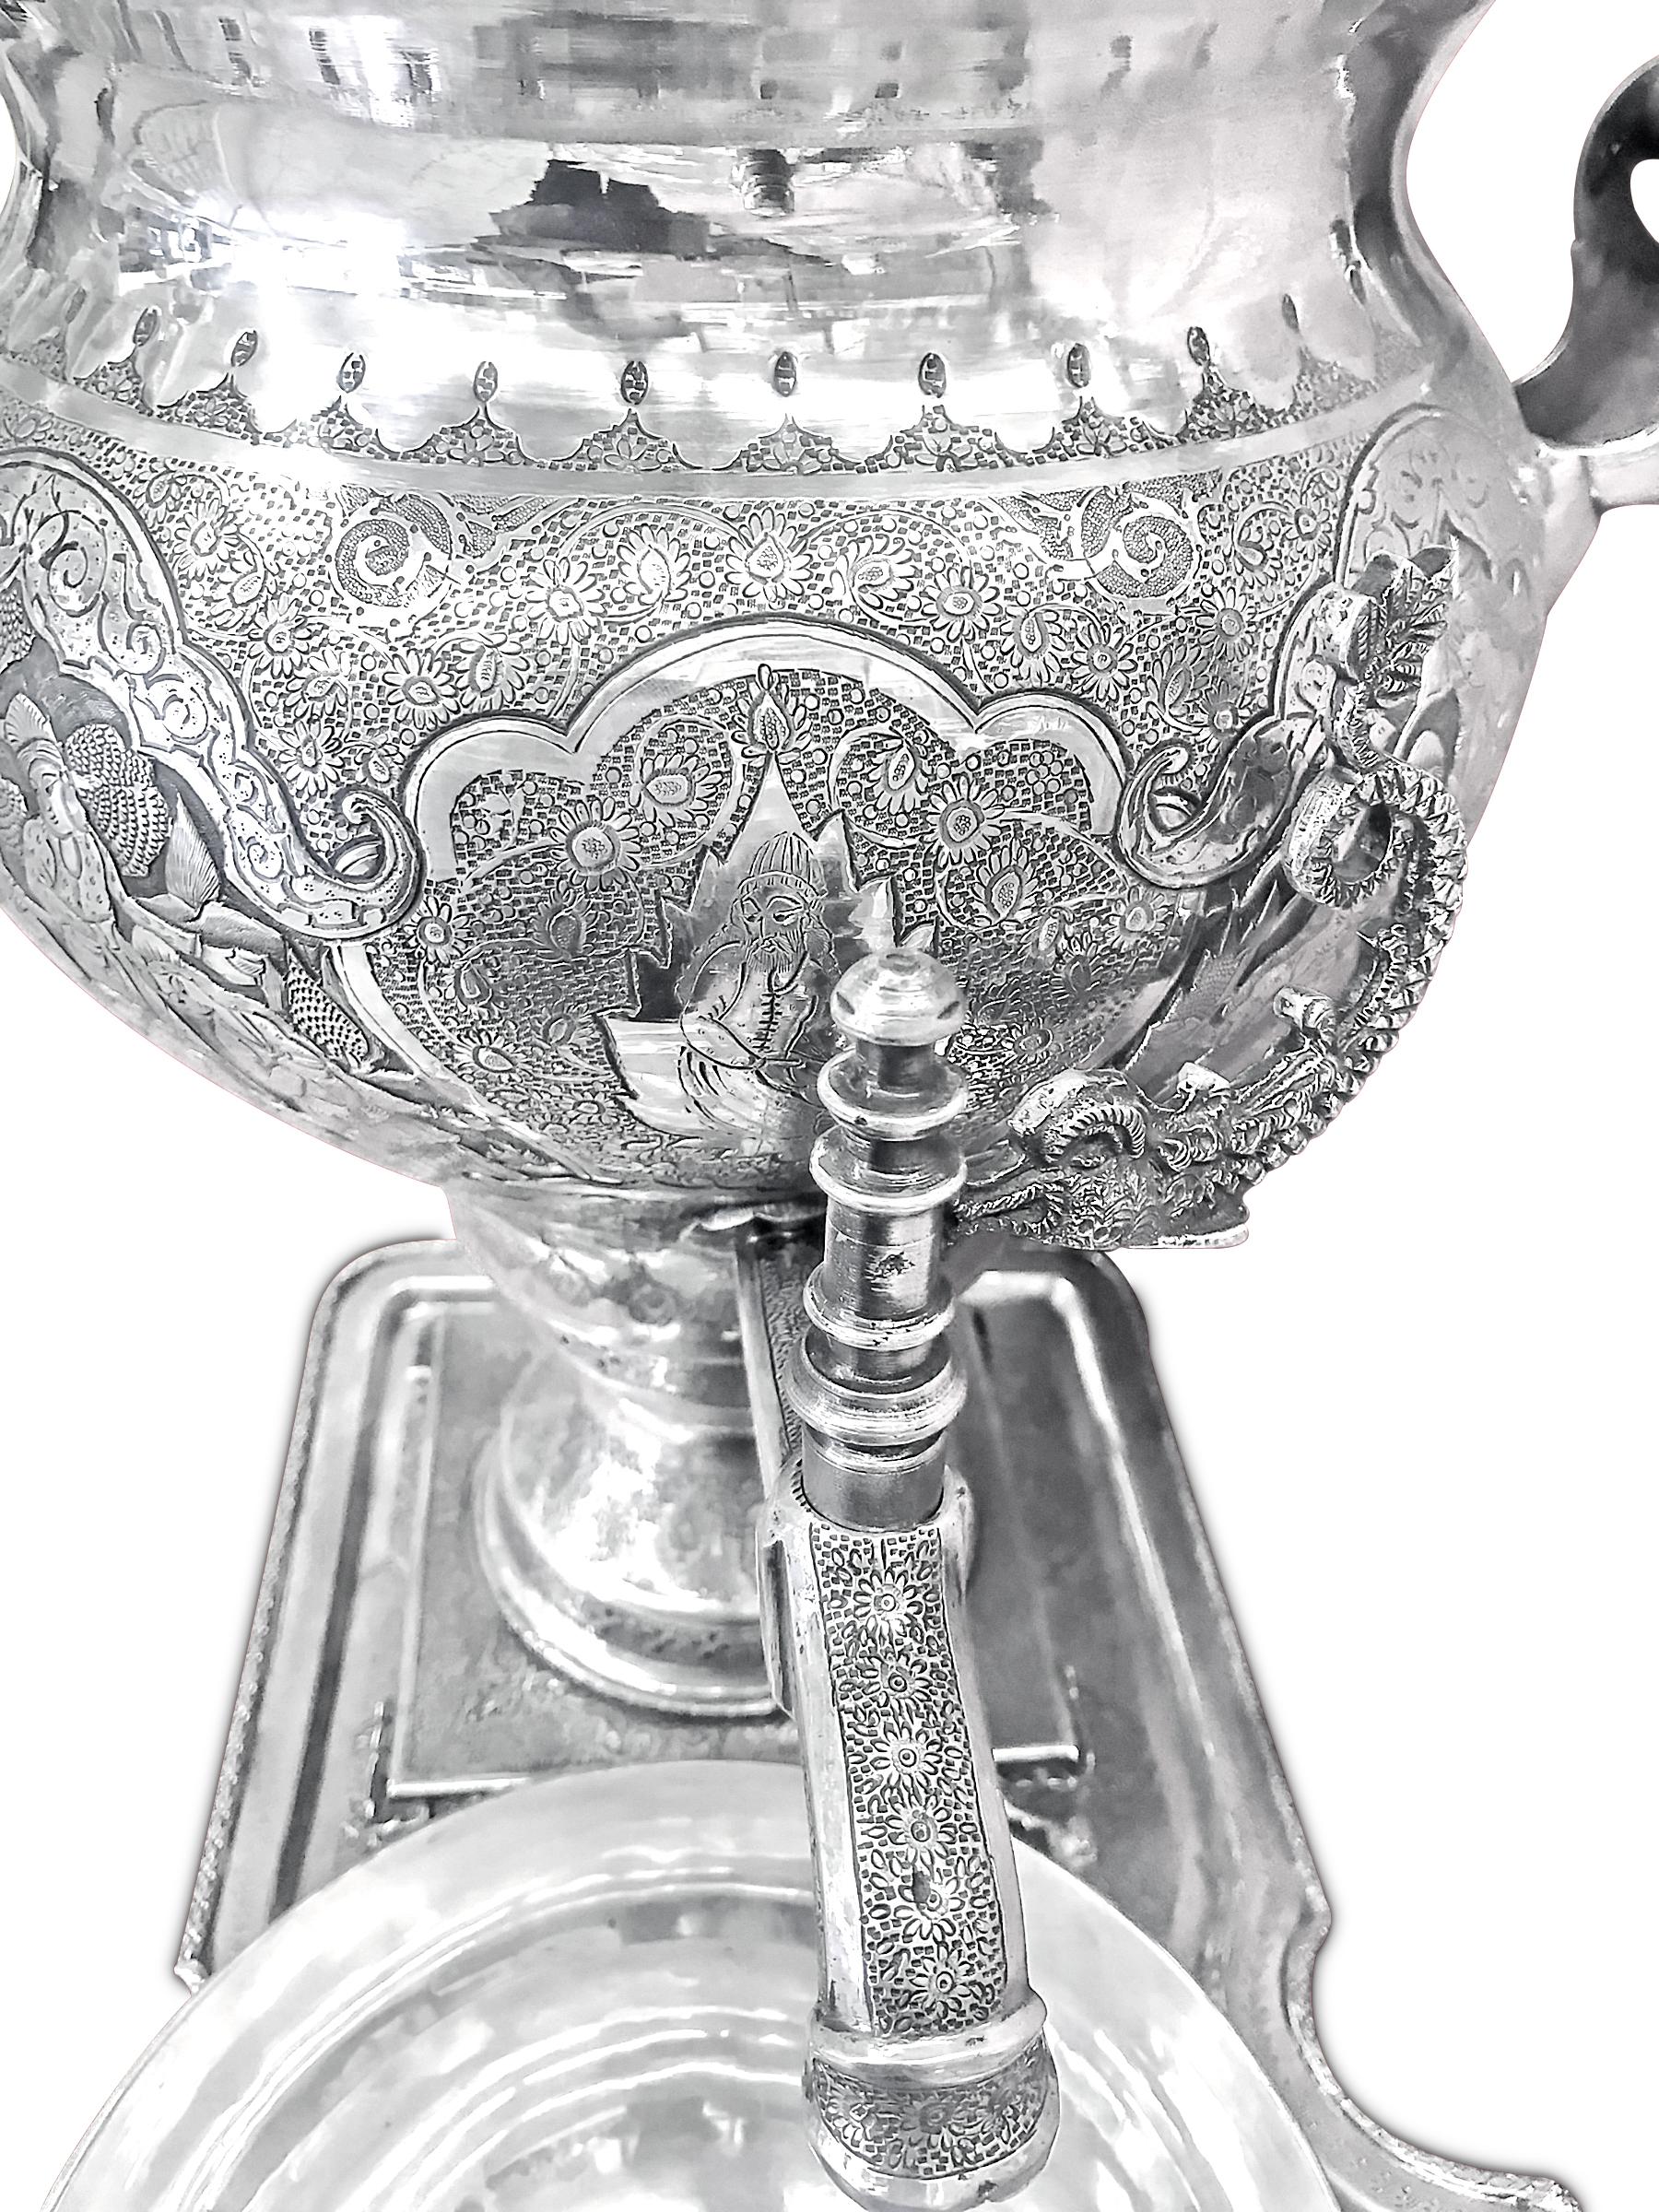 Collectible 1920s Silver Samavar from Iran Handcrafted &handCarved .Rare Piece 4